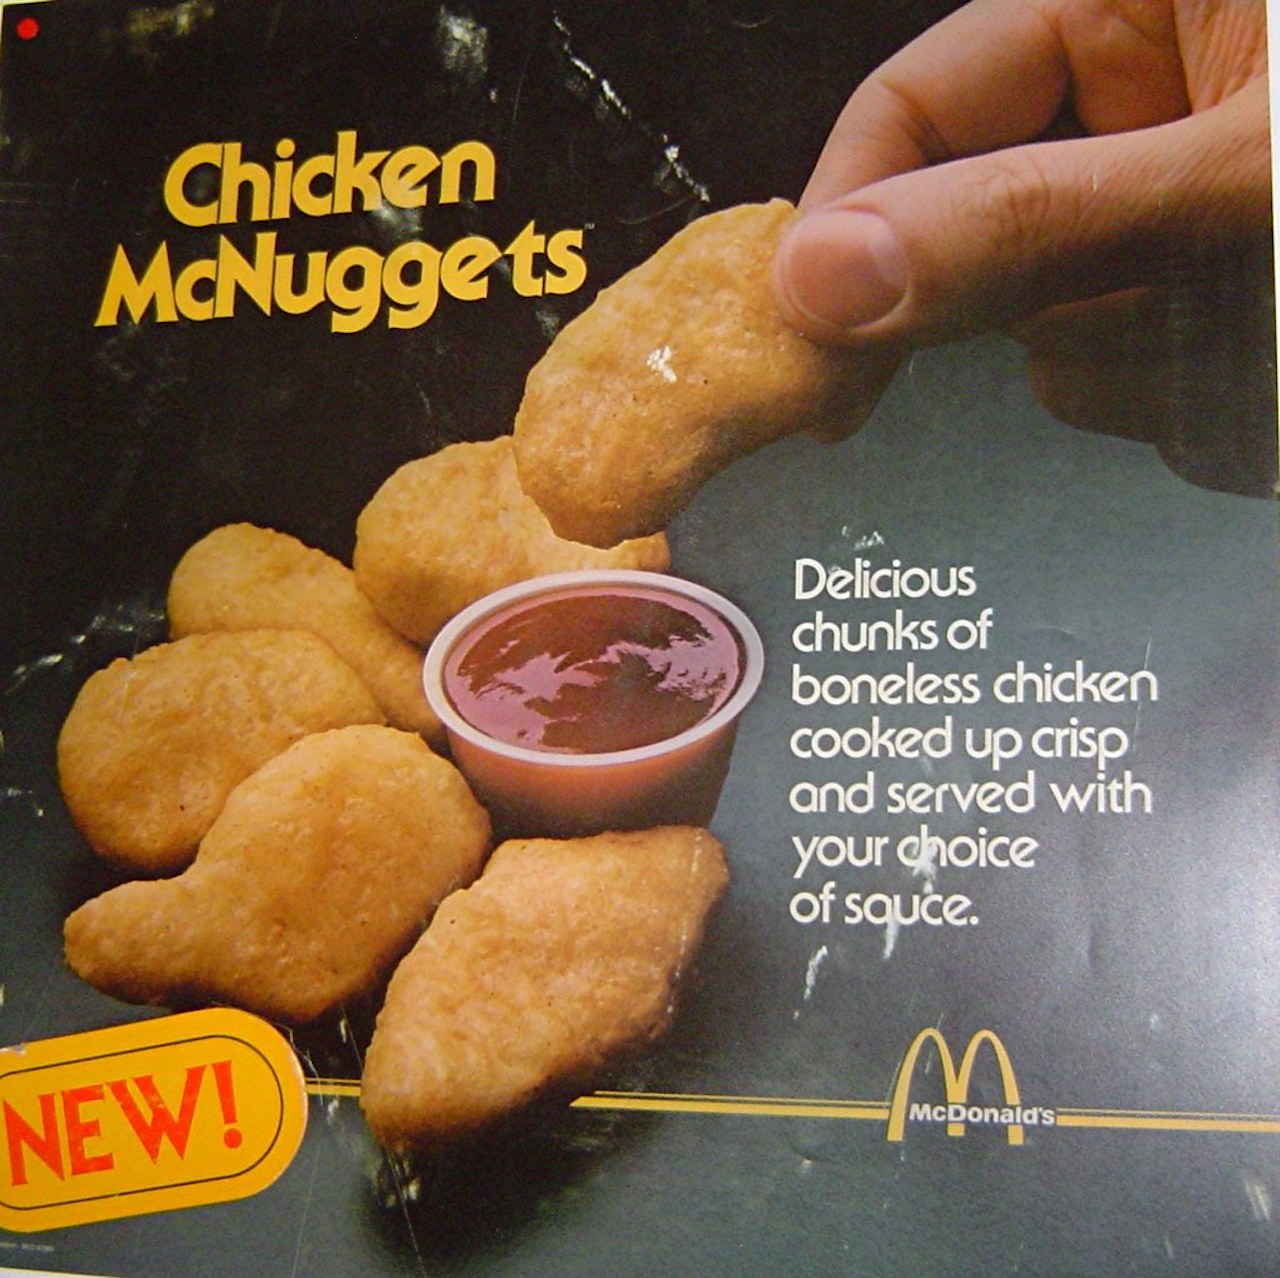 Tackle Today: The Rise of Chicken McNuggets (Chicken McNuggets vintage ad)